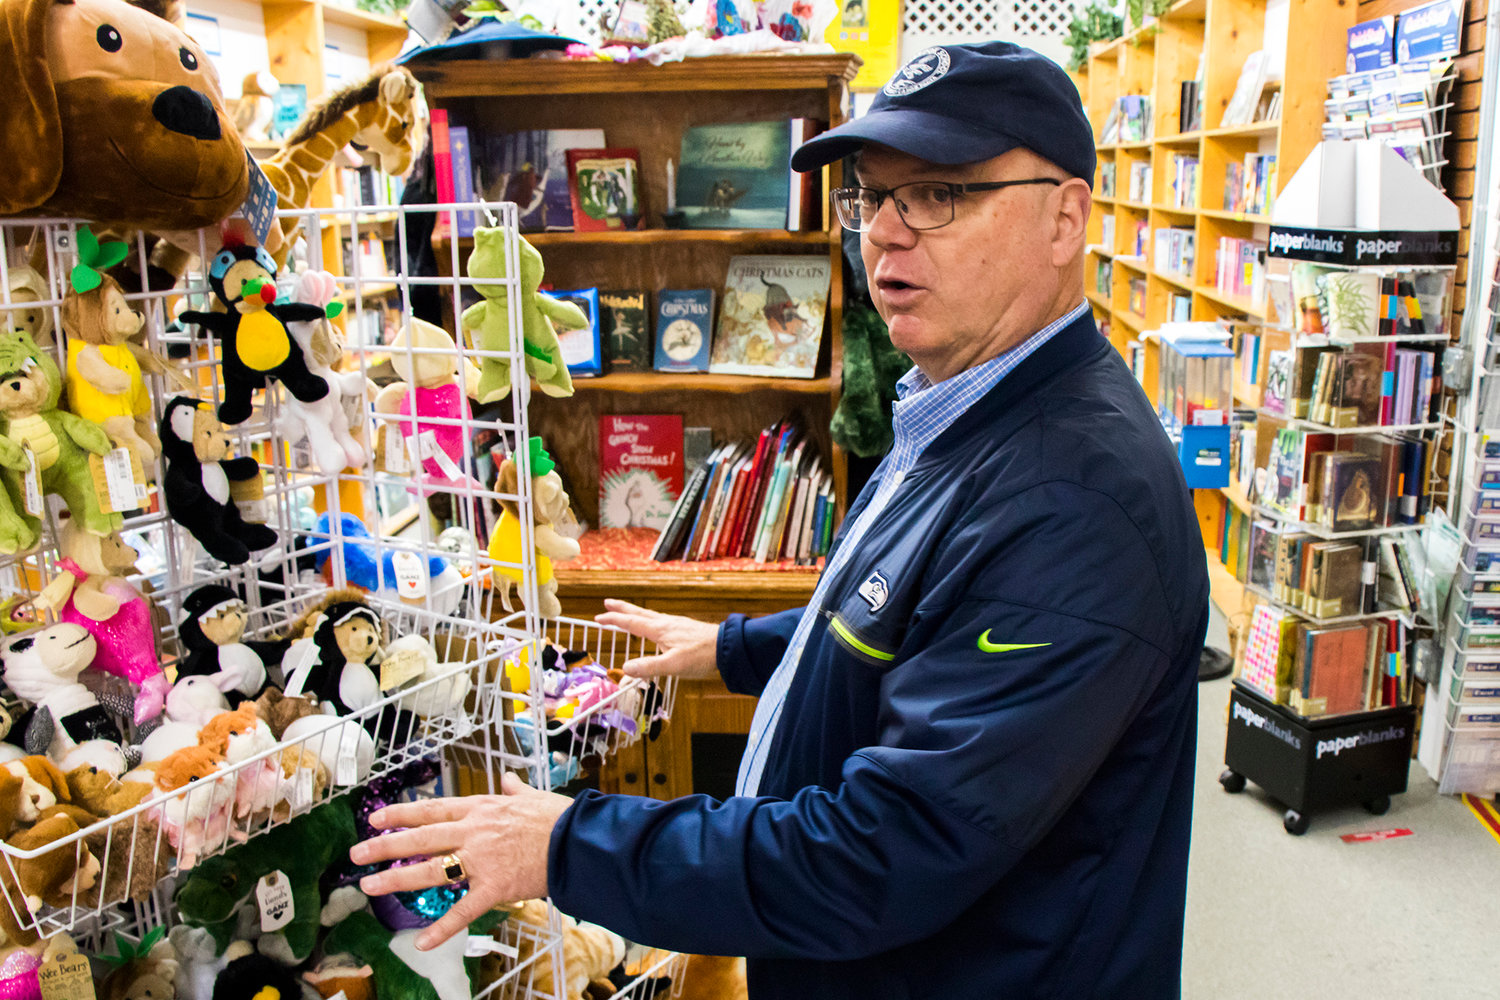 Owner David Hartz talks about toys on display inside Book 'N' Brush Friday afternoon in Chehalis.